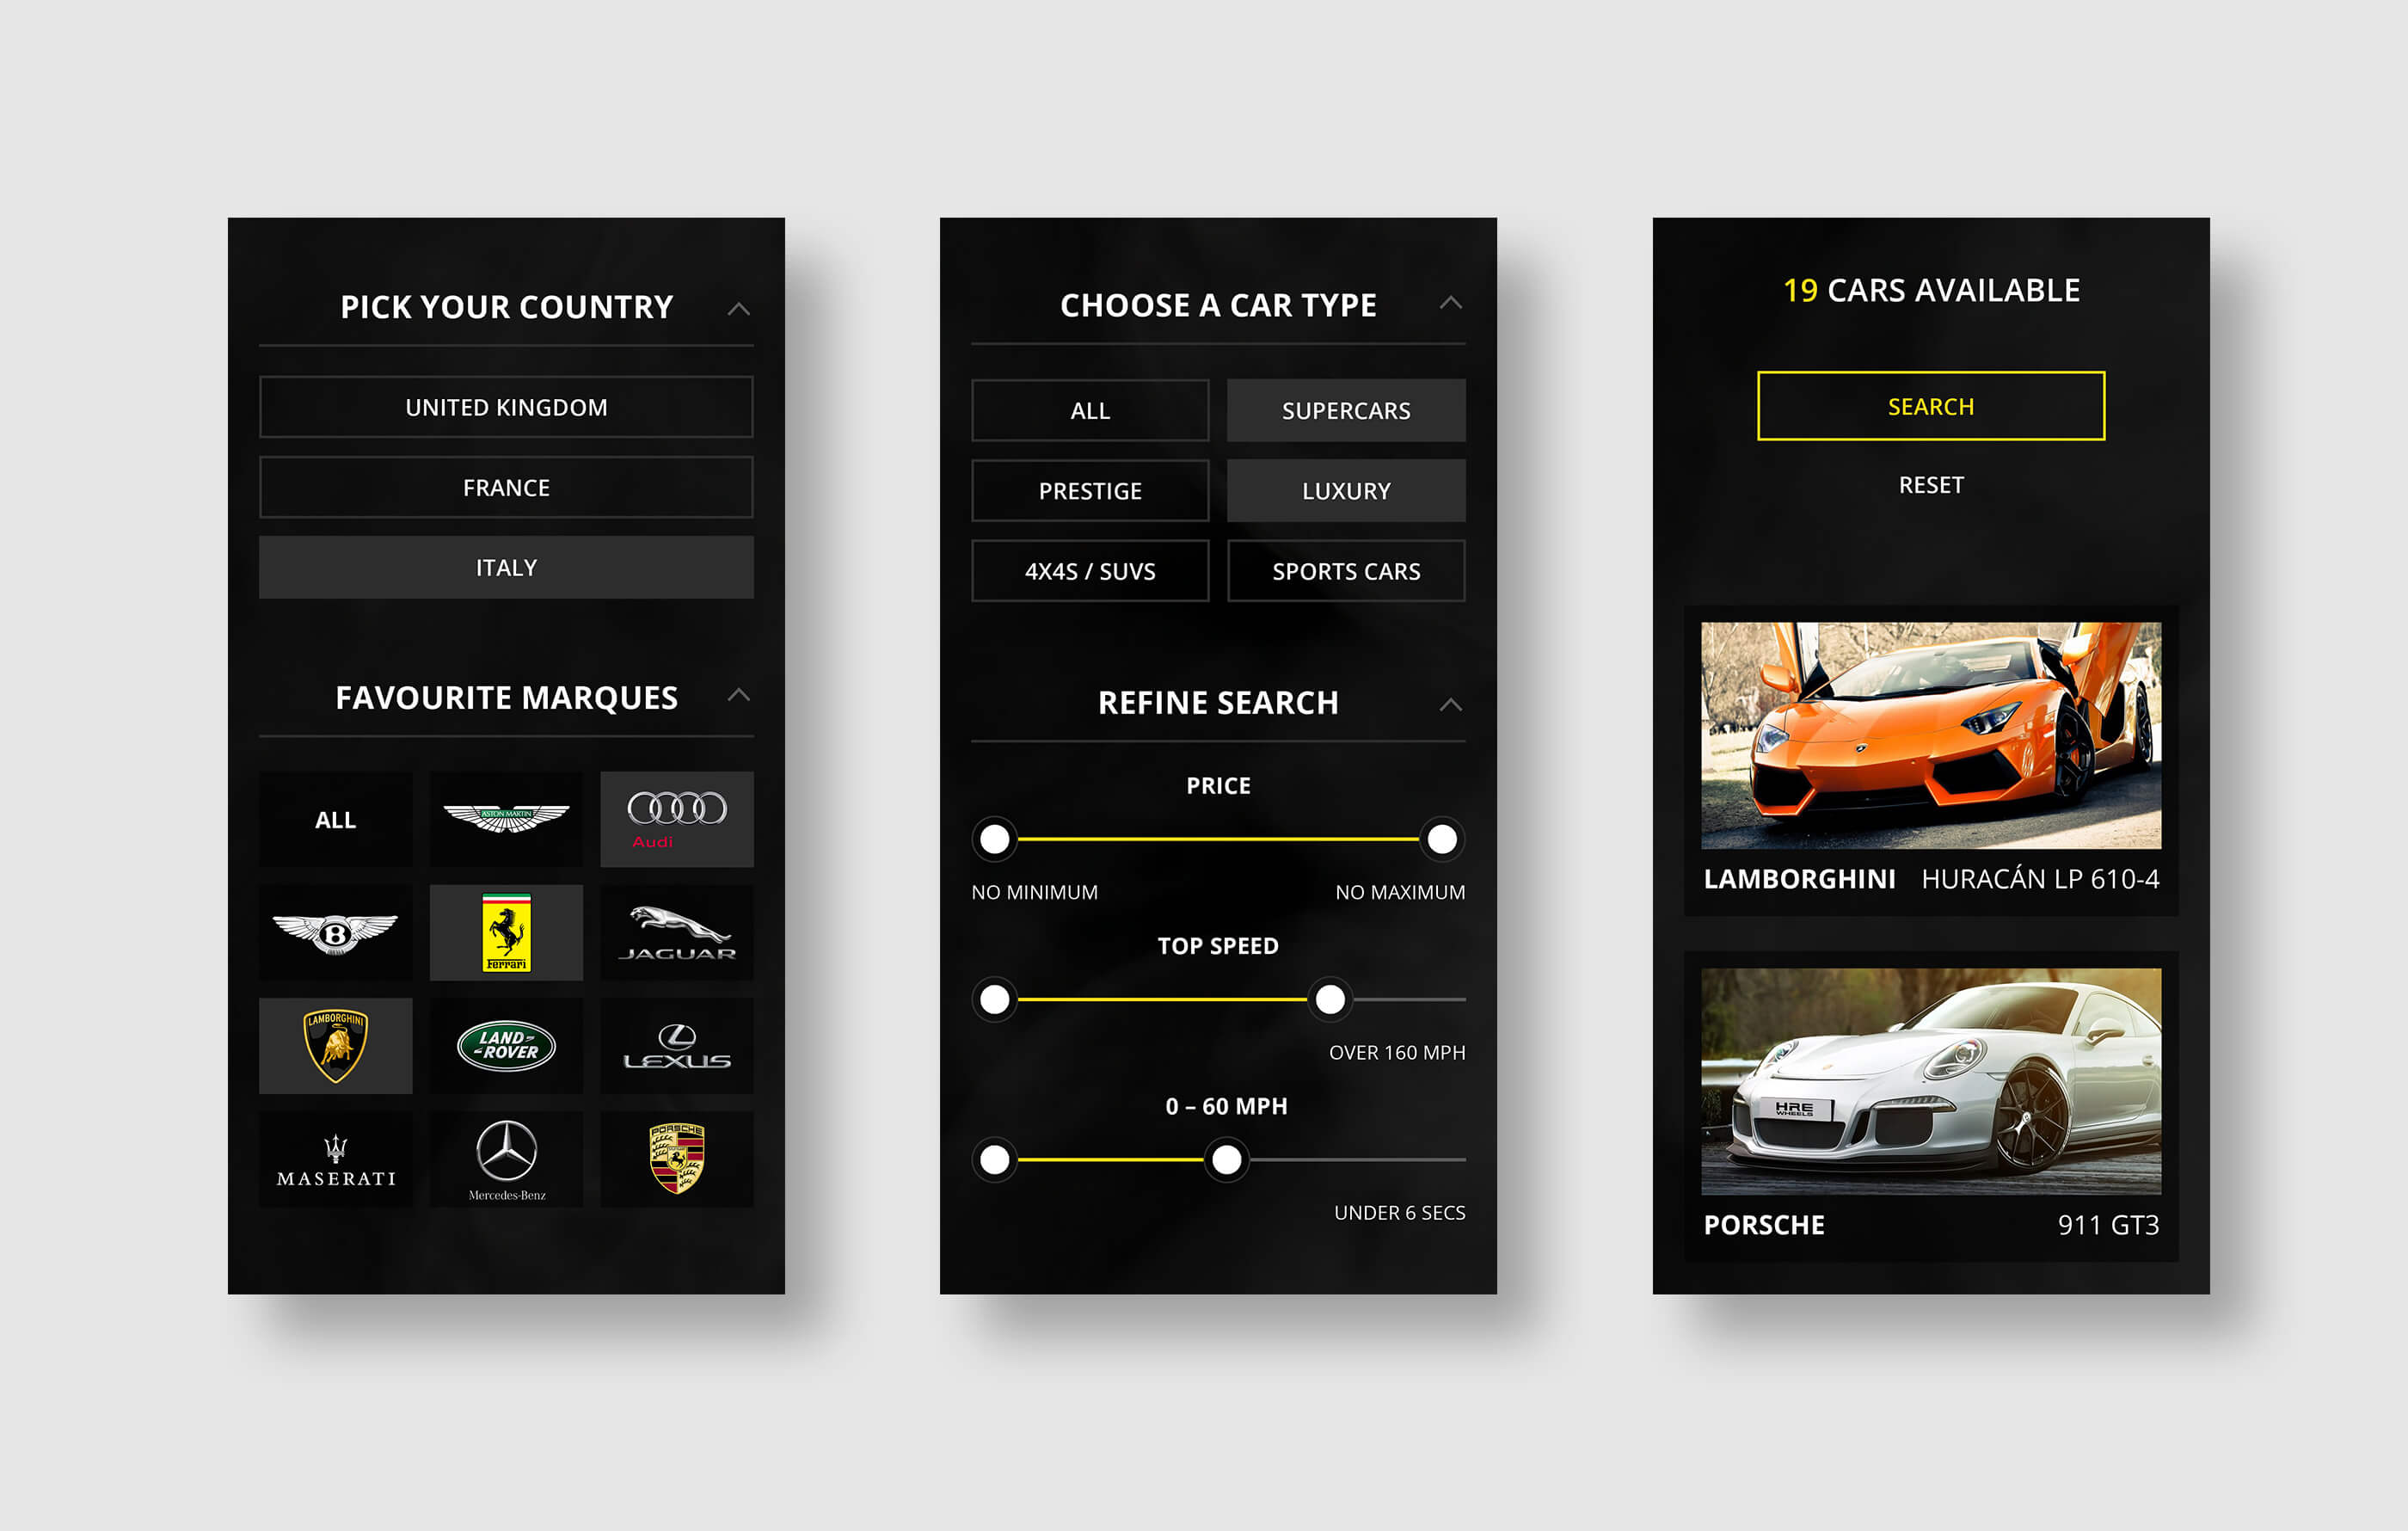 Three mobile phone mockups of the search filter page, featuring a country selector, manufacturer logos, car type selector and yellow slider components on a black background